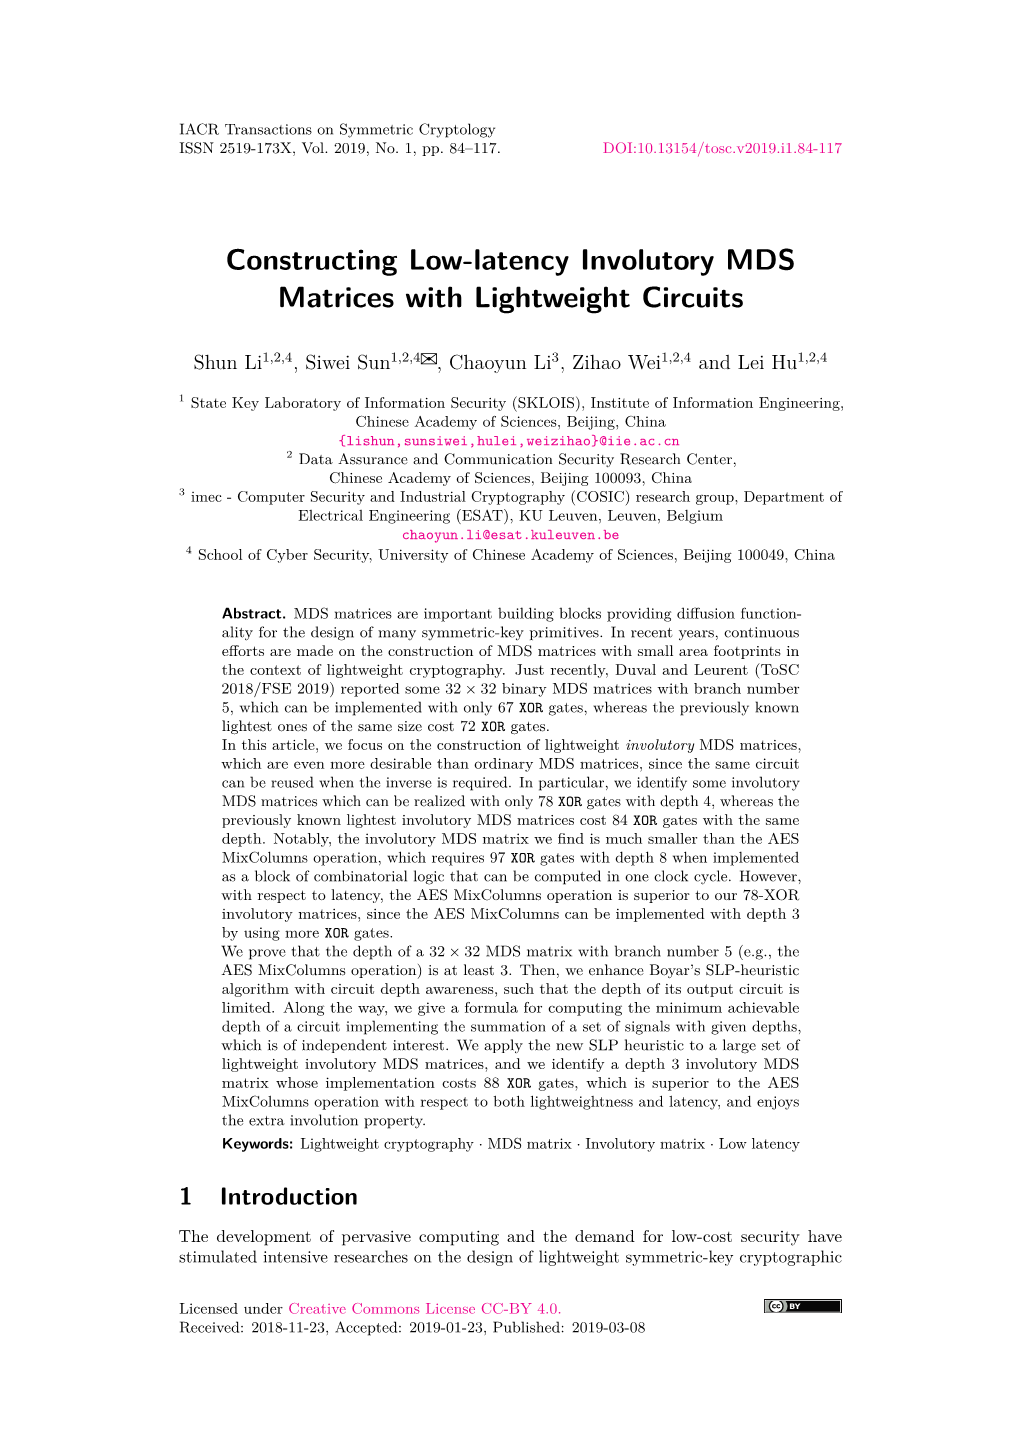 Constructing Low-Latency Involutory MDS Matrices with Lightweight Circuits